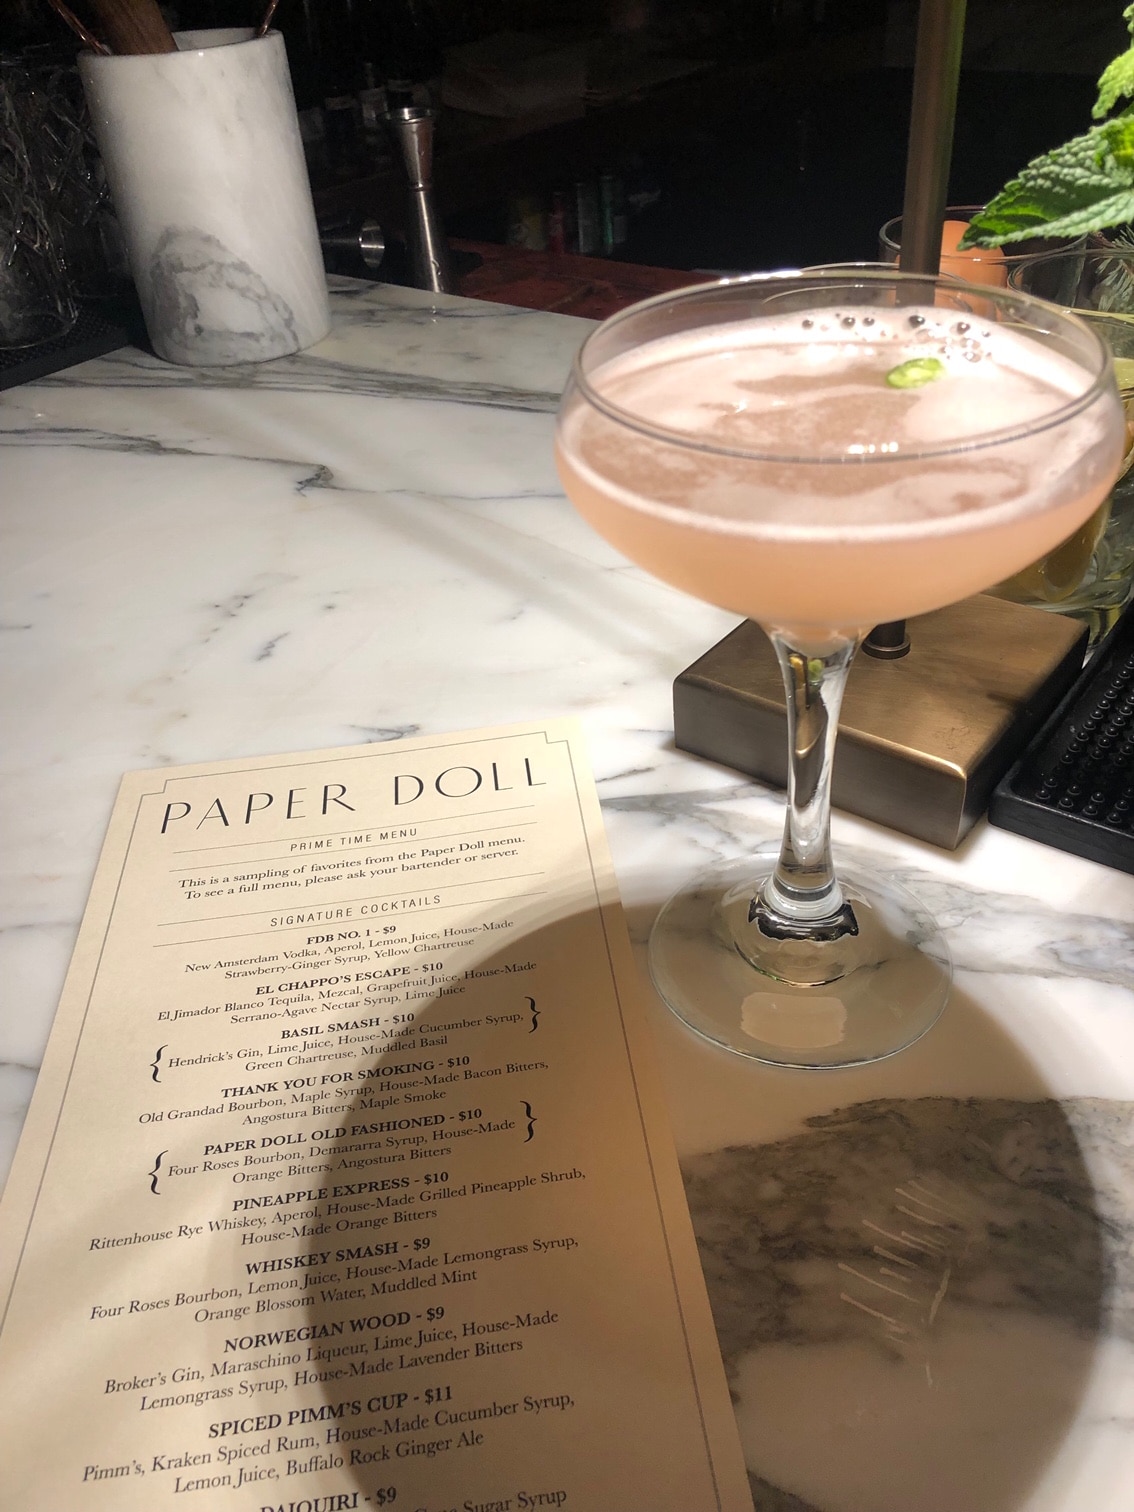 paperdoll Paper Doll Bar joins the downtown Birmingham bar scene